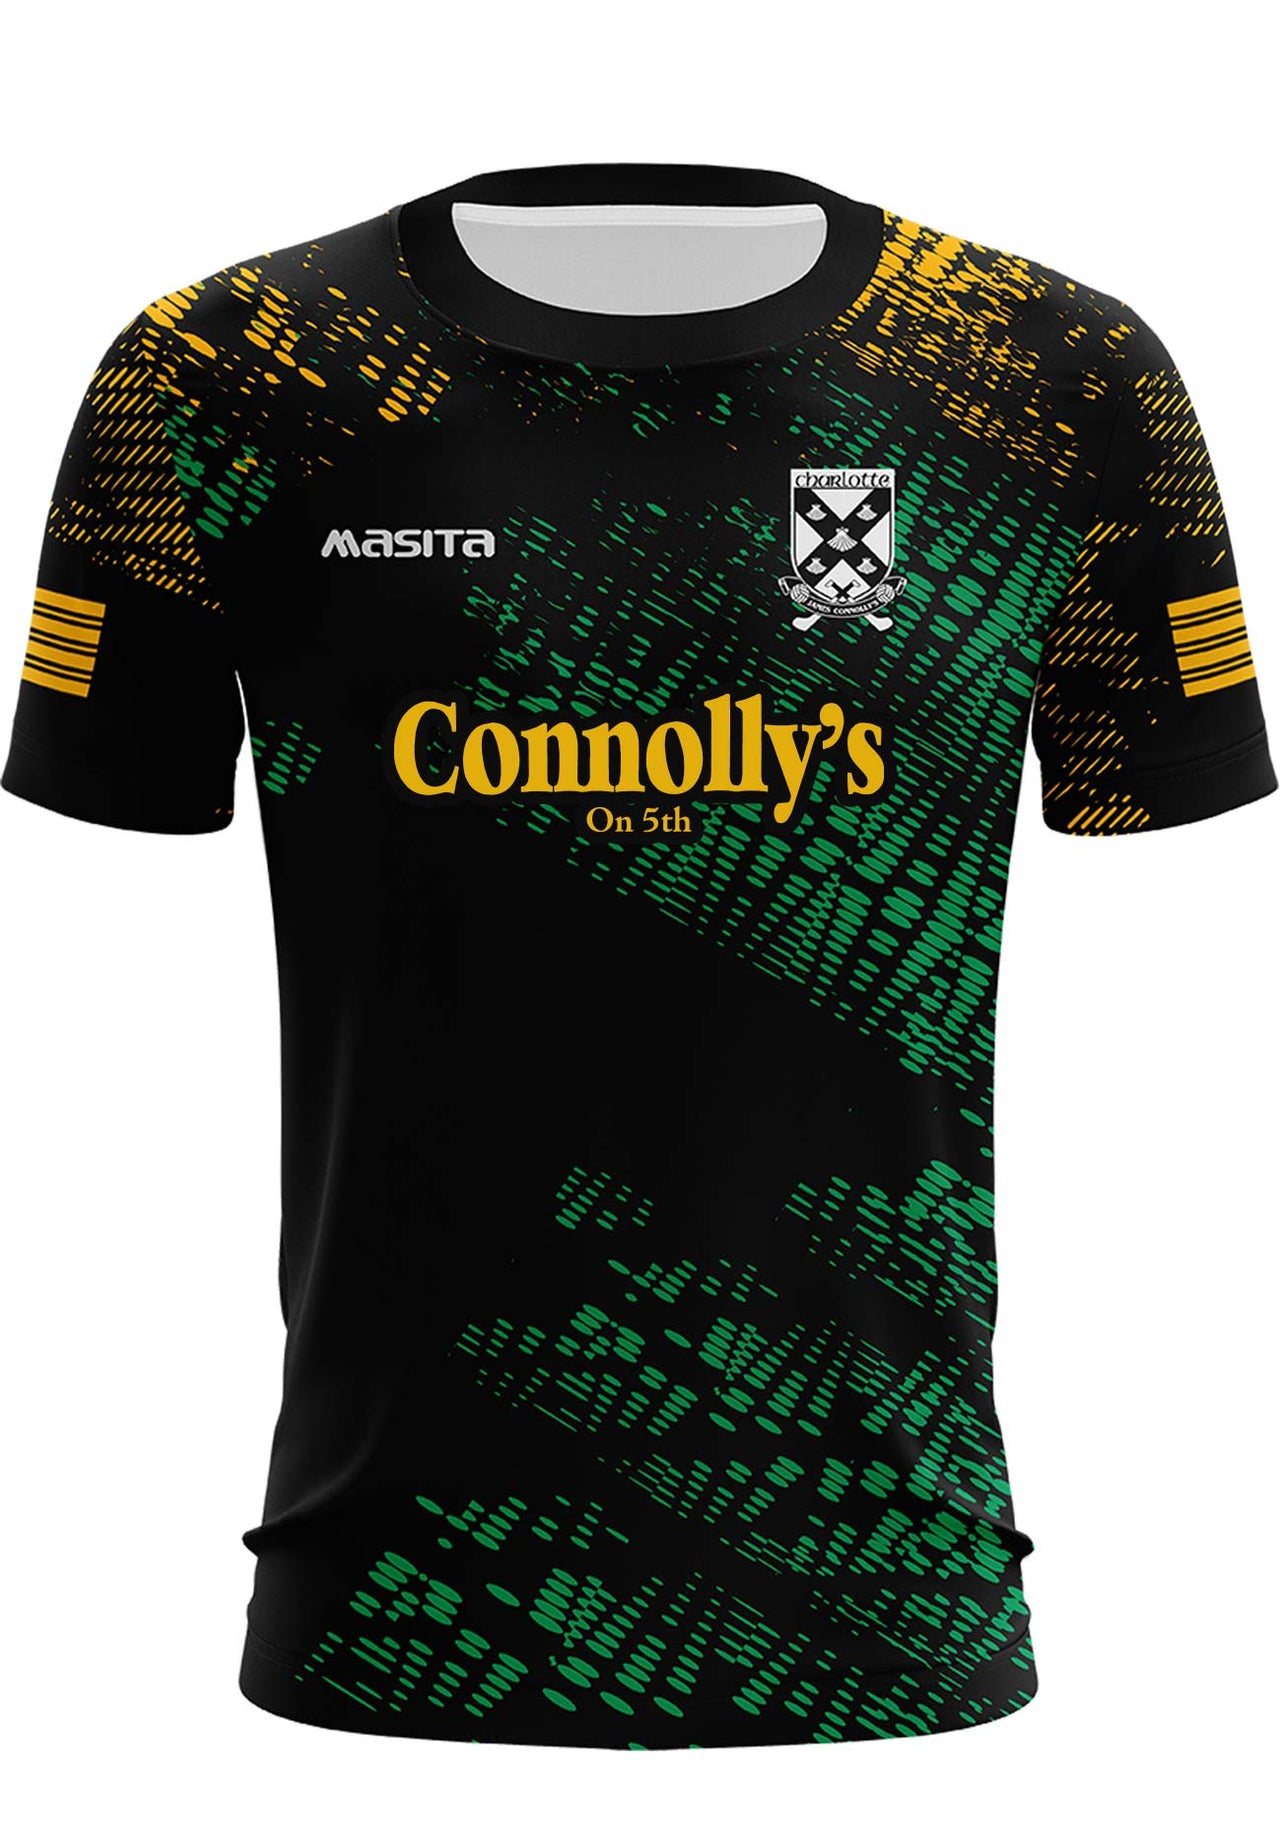 Charlotte James Connolly's Training Jersey Kids